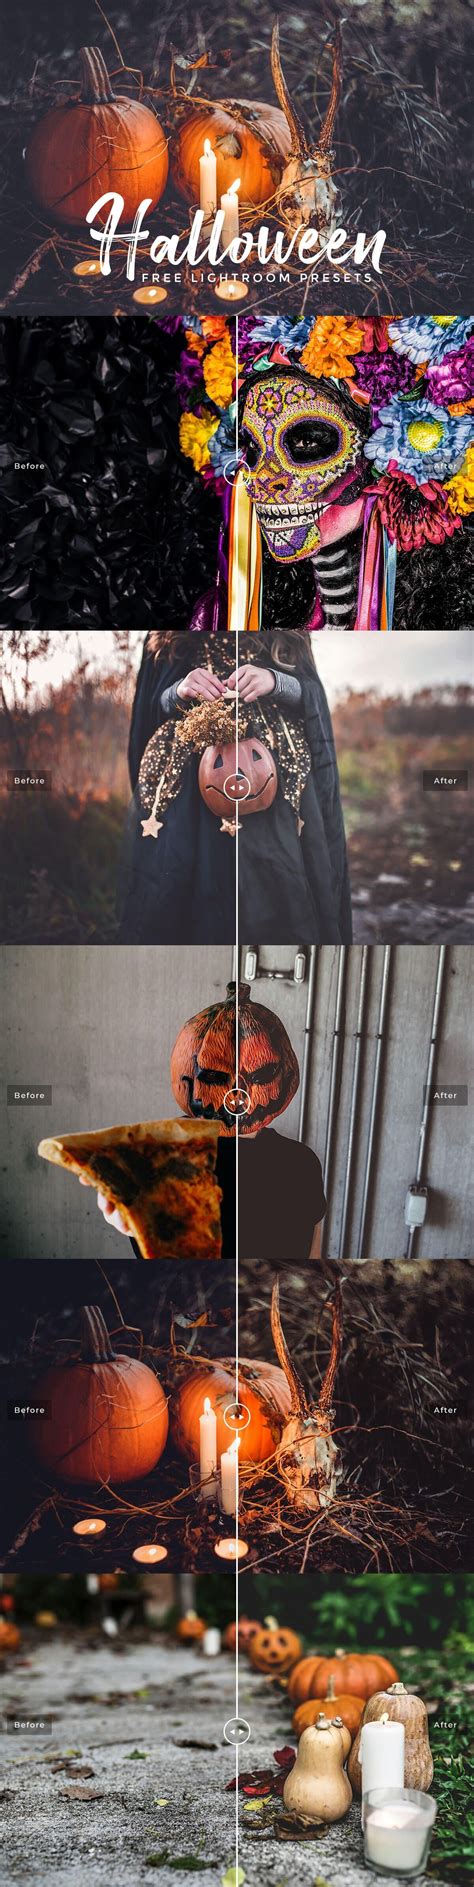 All real estate photographers need this set of lightroom presets for indoor photography. Free Halloween Lightroom Presets | Lightroom presets ...